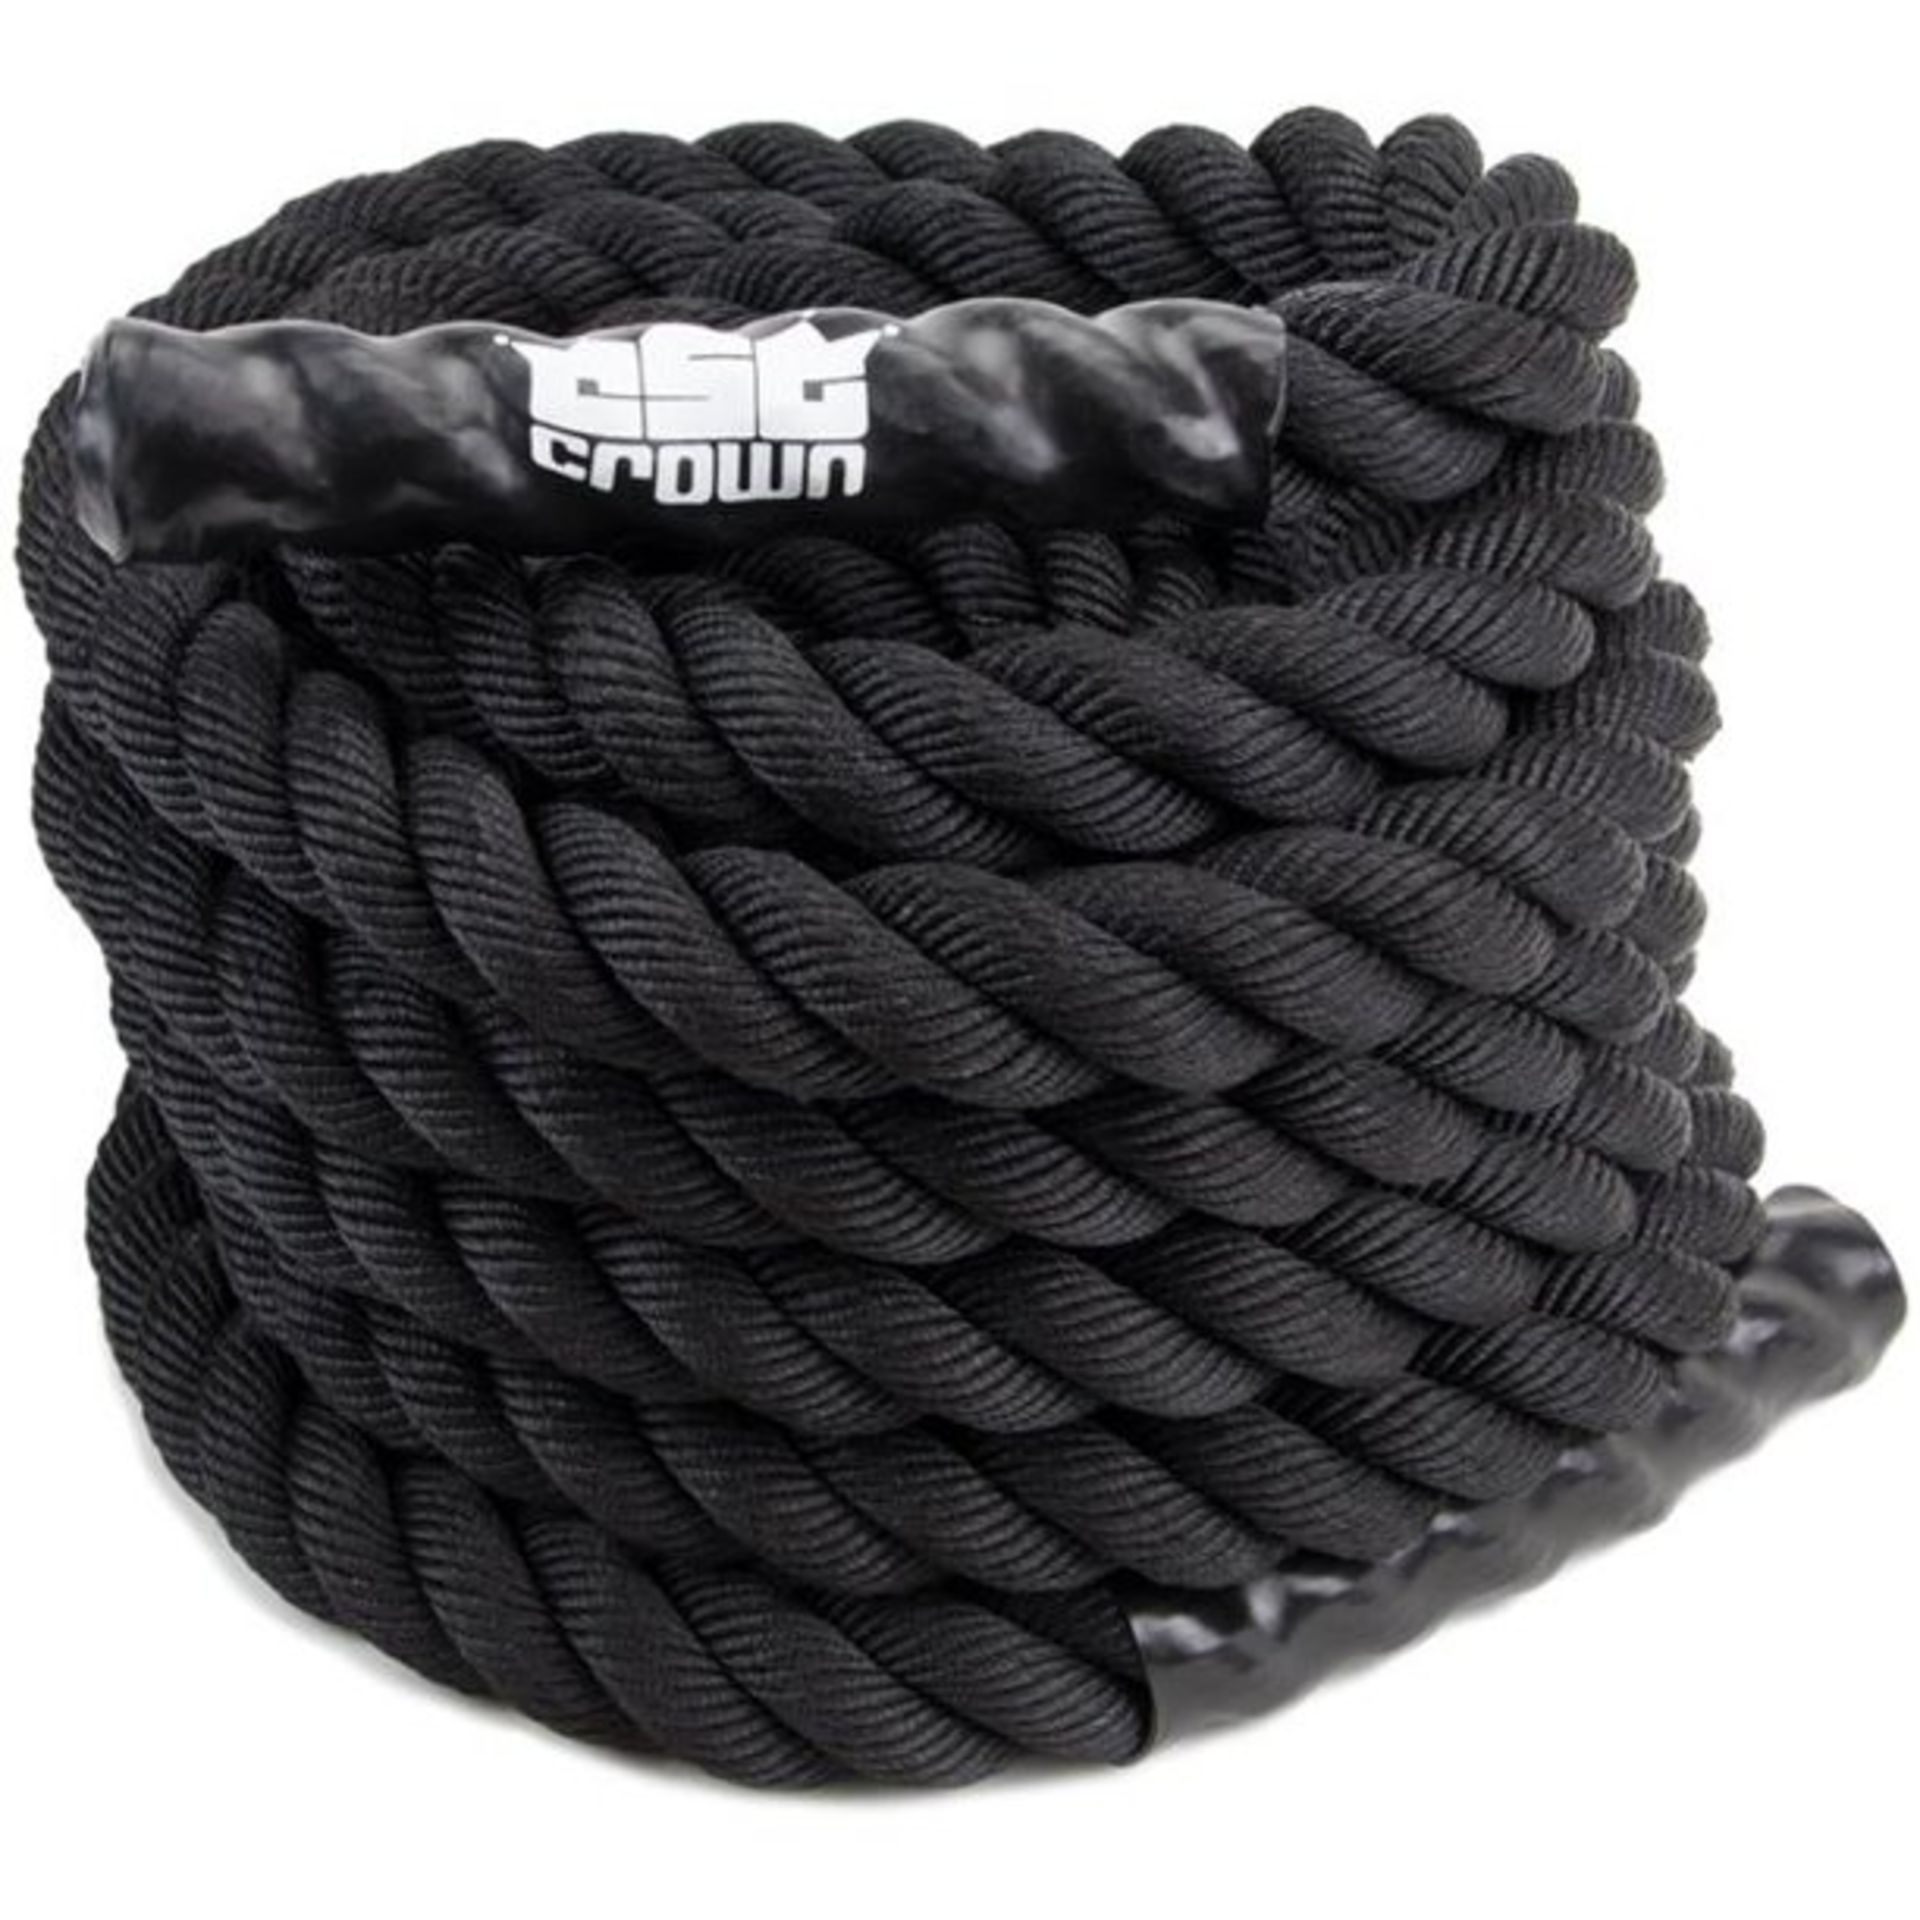 BATTLE ROPE - 1.5 INCH DIAMITER X 30 FEET LONG. ALL NEW IN ORIGINAL FACTORY PACK - RETAIL $90.00